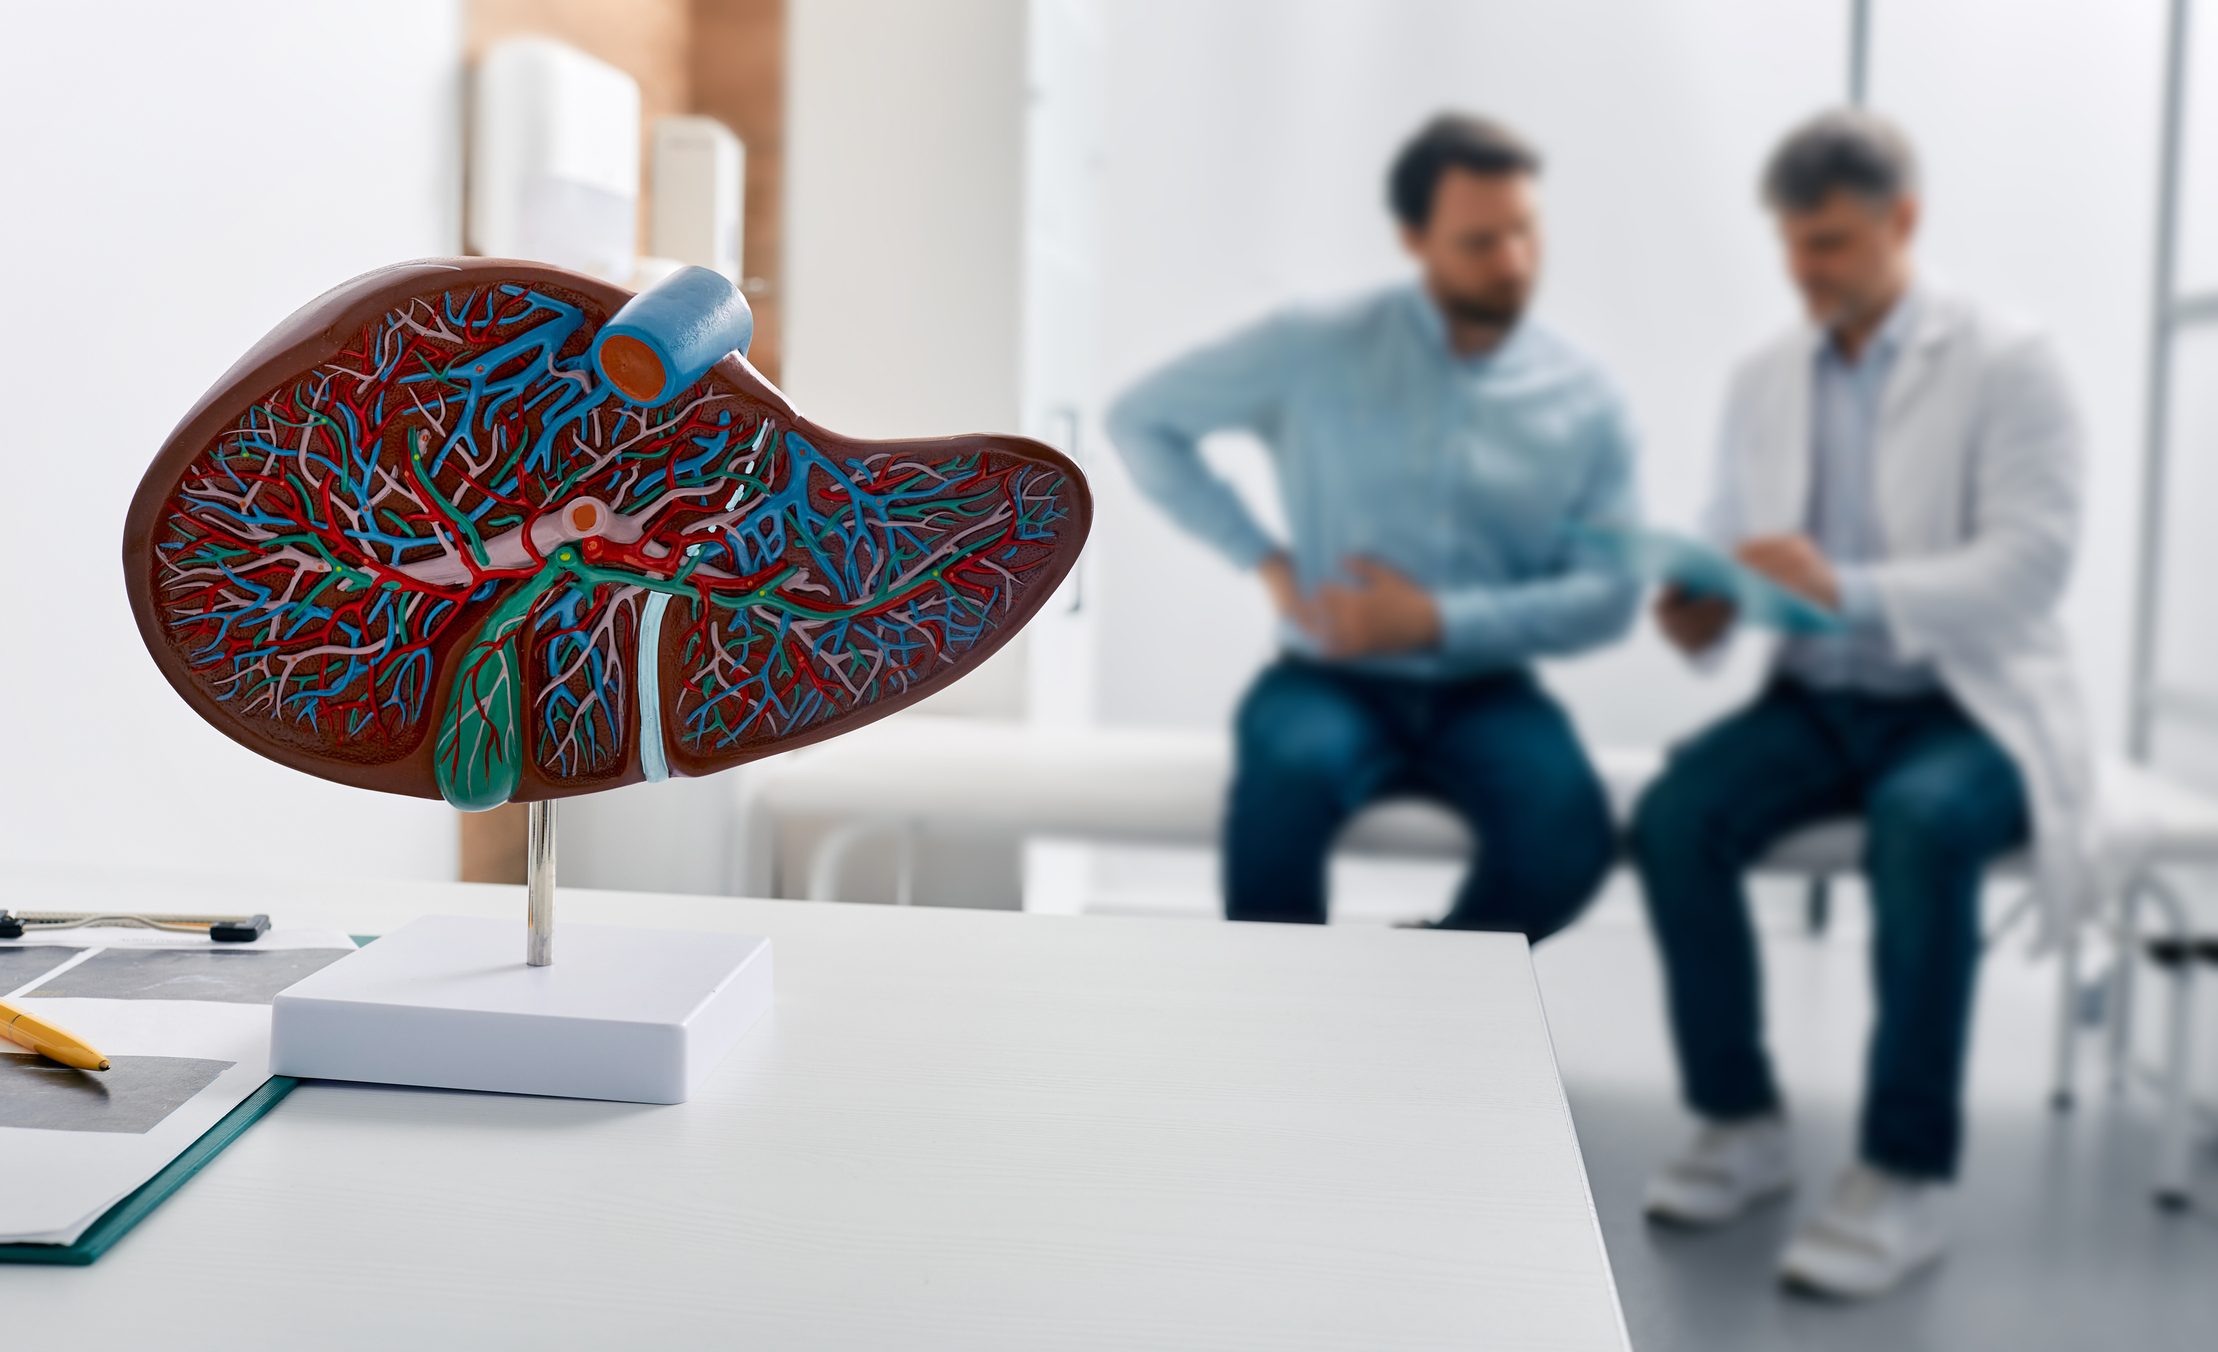 Anatomical liver model on desk and practitioner talking to patient in the background